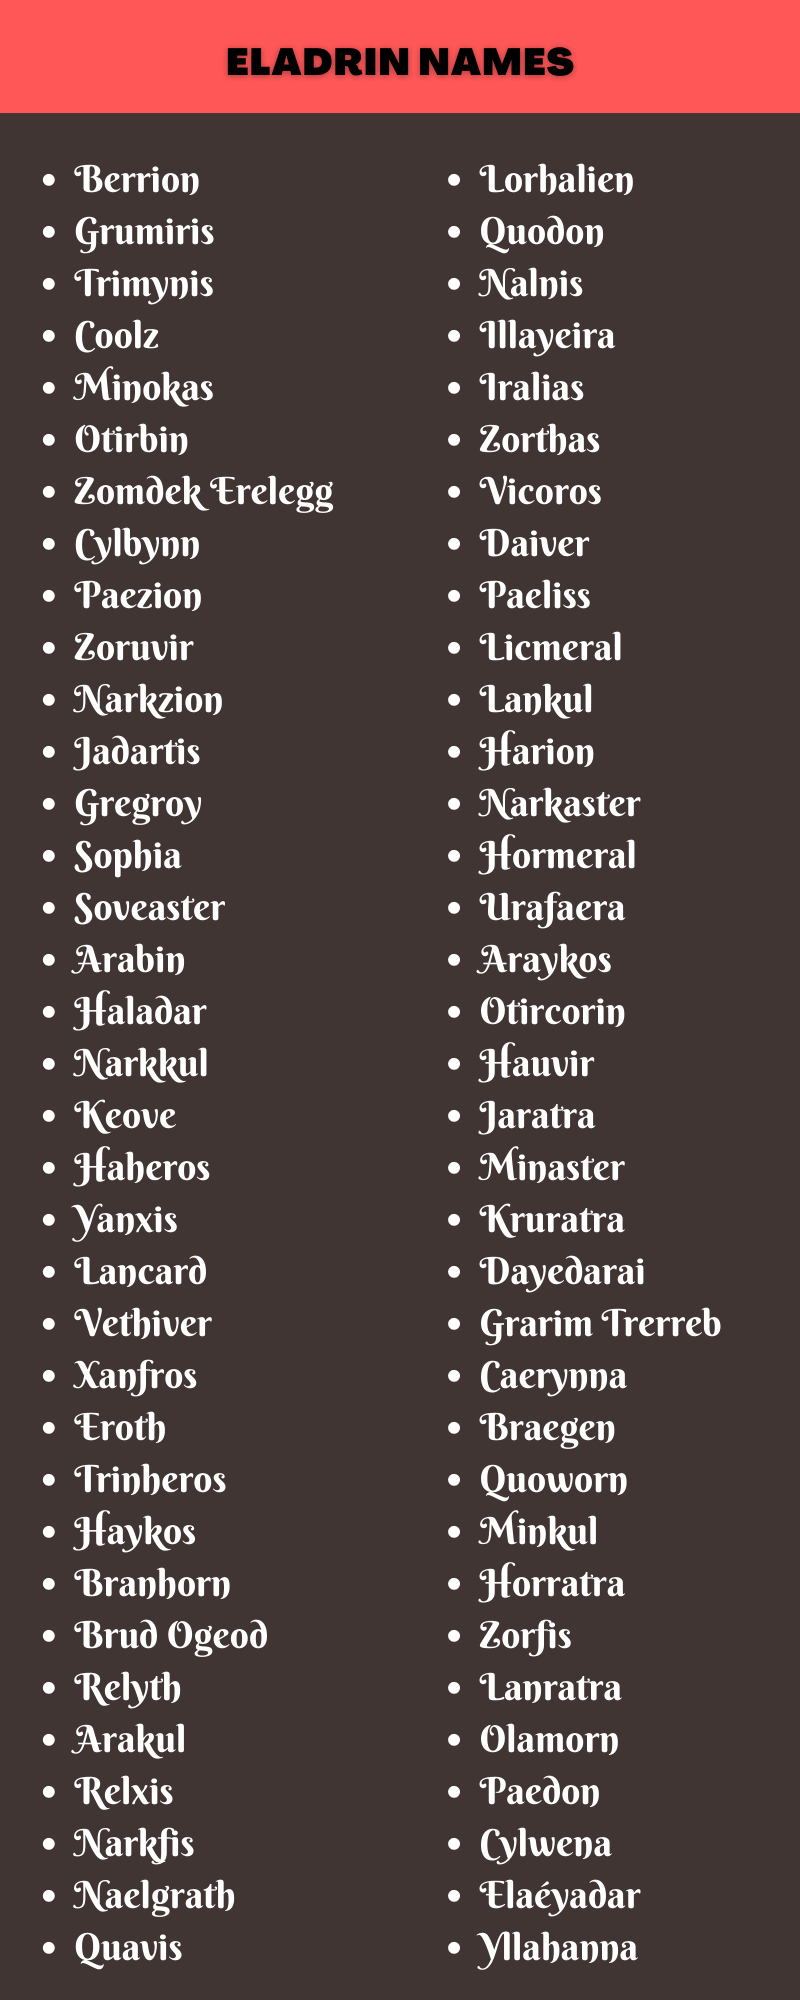 400 Best Eladrin Names for Your Fantasy Characters